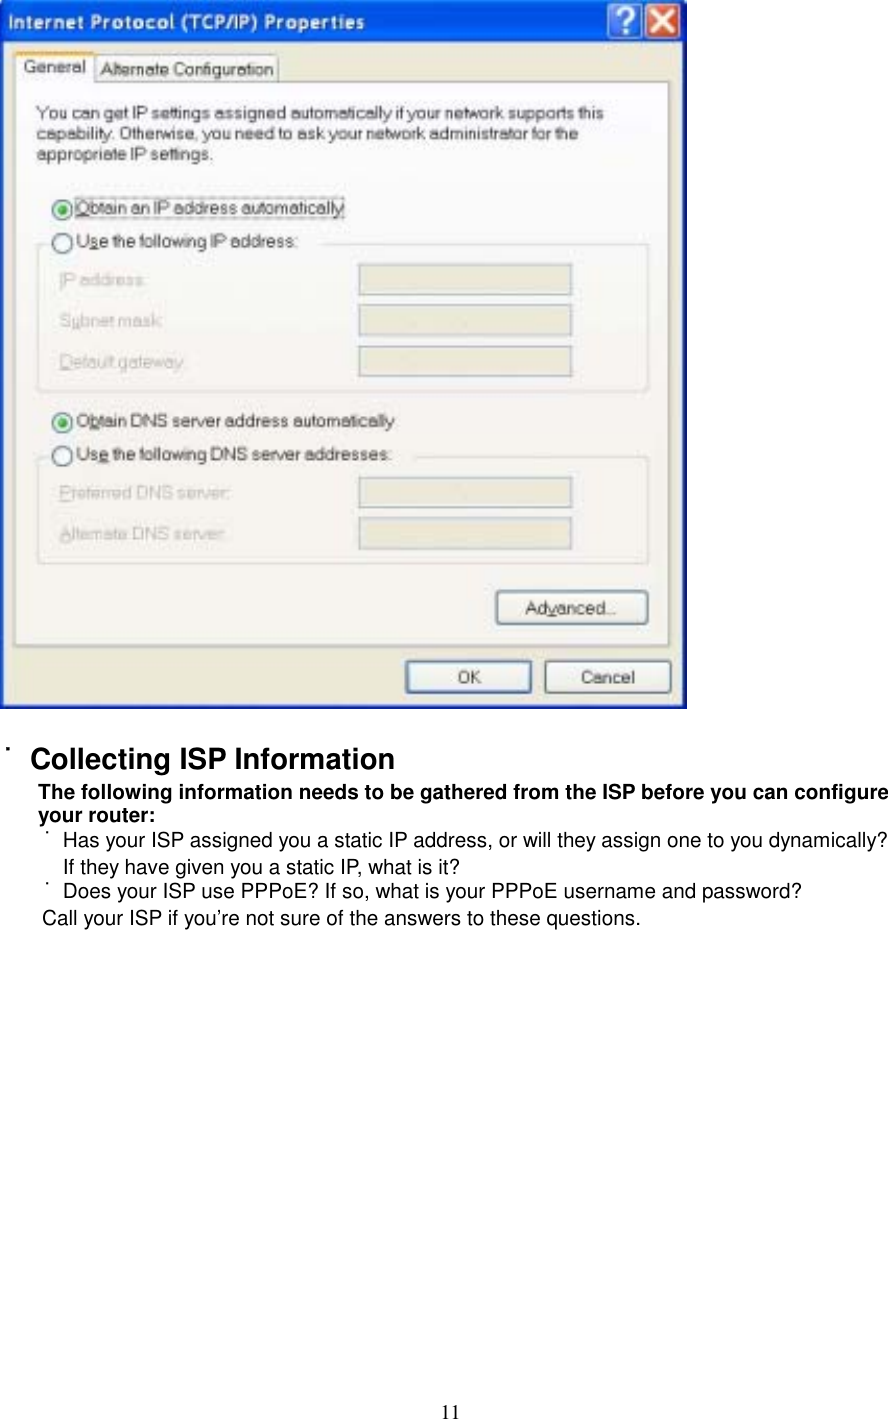  11  ˙Collecting ISP Information The following information needs to be gathered from the ISP before you can configure your router: ˙Has your ISP assigned you a static IP address, or will they assign one to you dynamically? If they have given you a static IP, what is it? ˙Does your ISP use PPPoE? If so, what is your PPPoE username and password? Call your ISP if you’re not sure of the answers to these questions.             